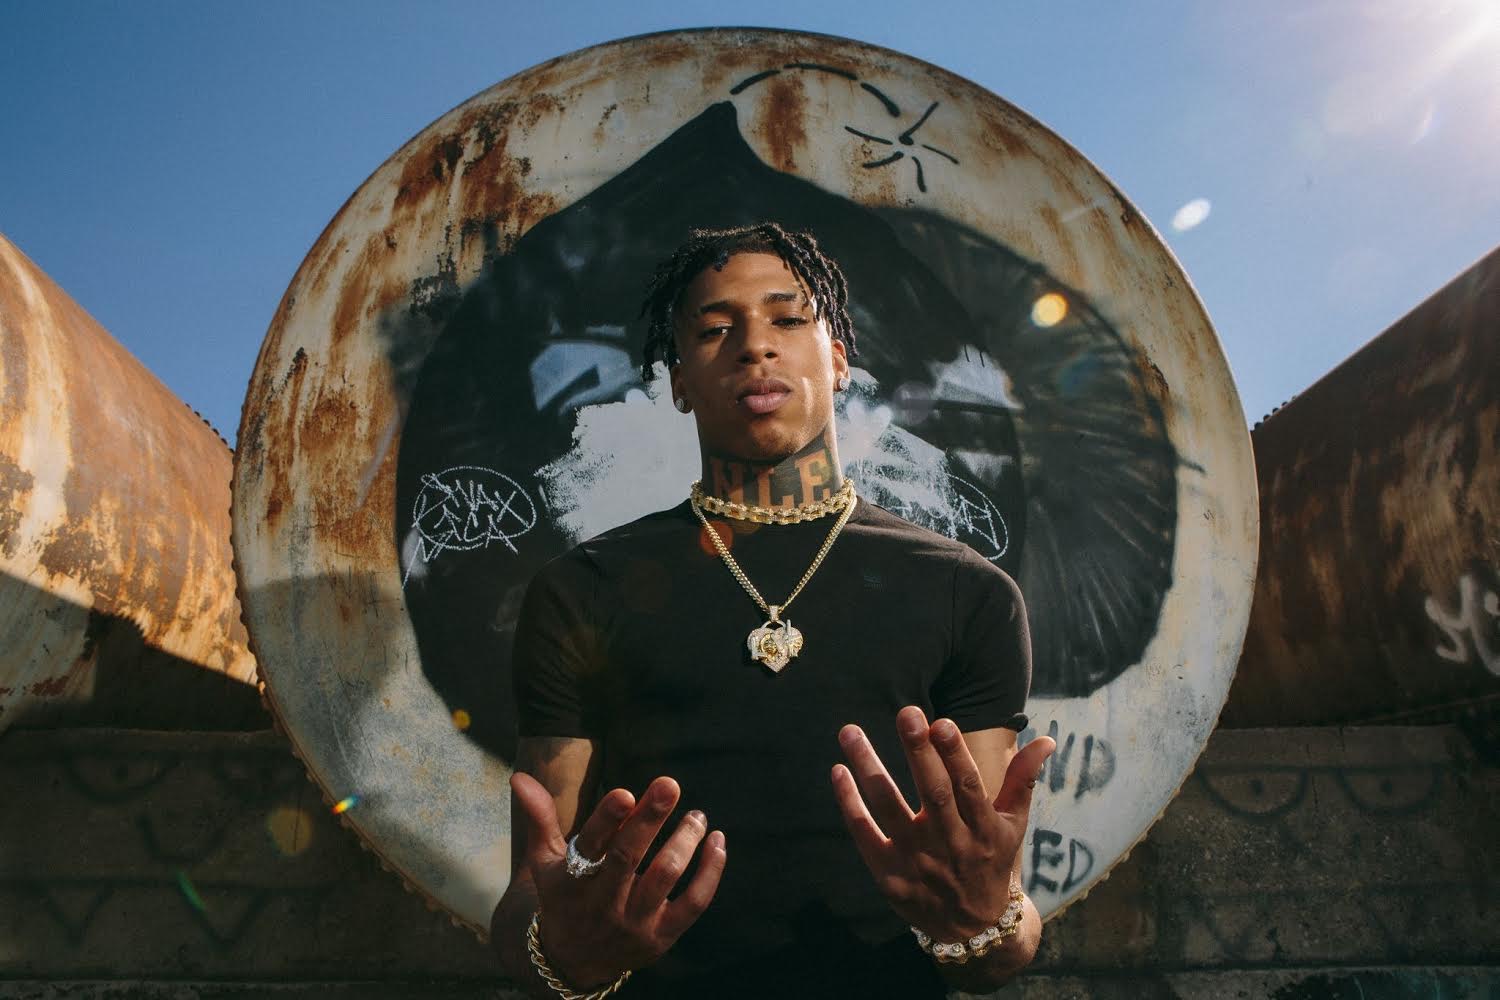 NLE Choppa Vows to Stop Rapping About Violence